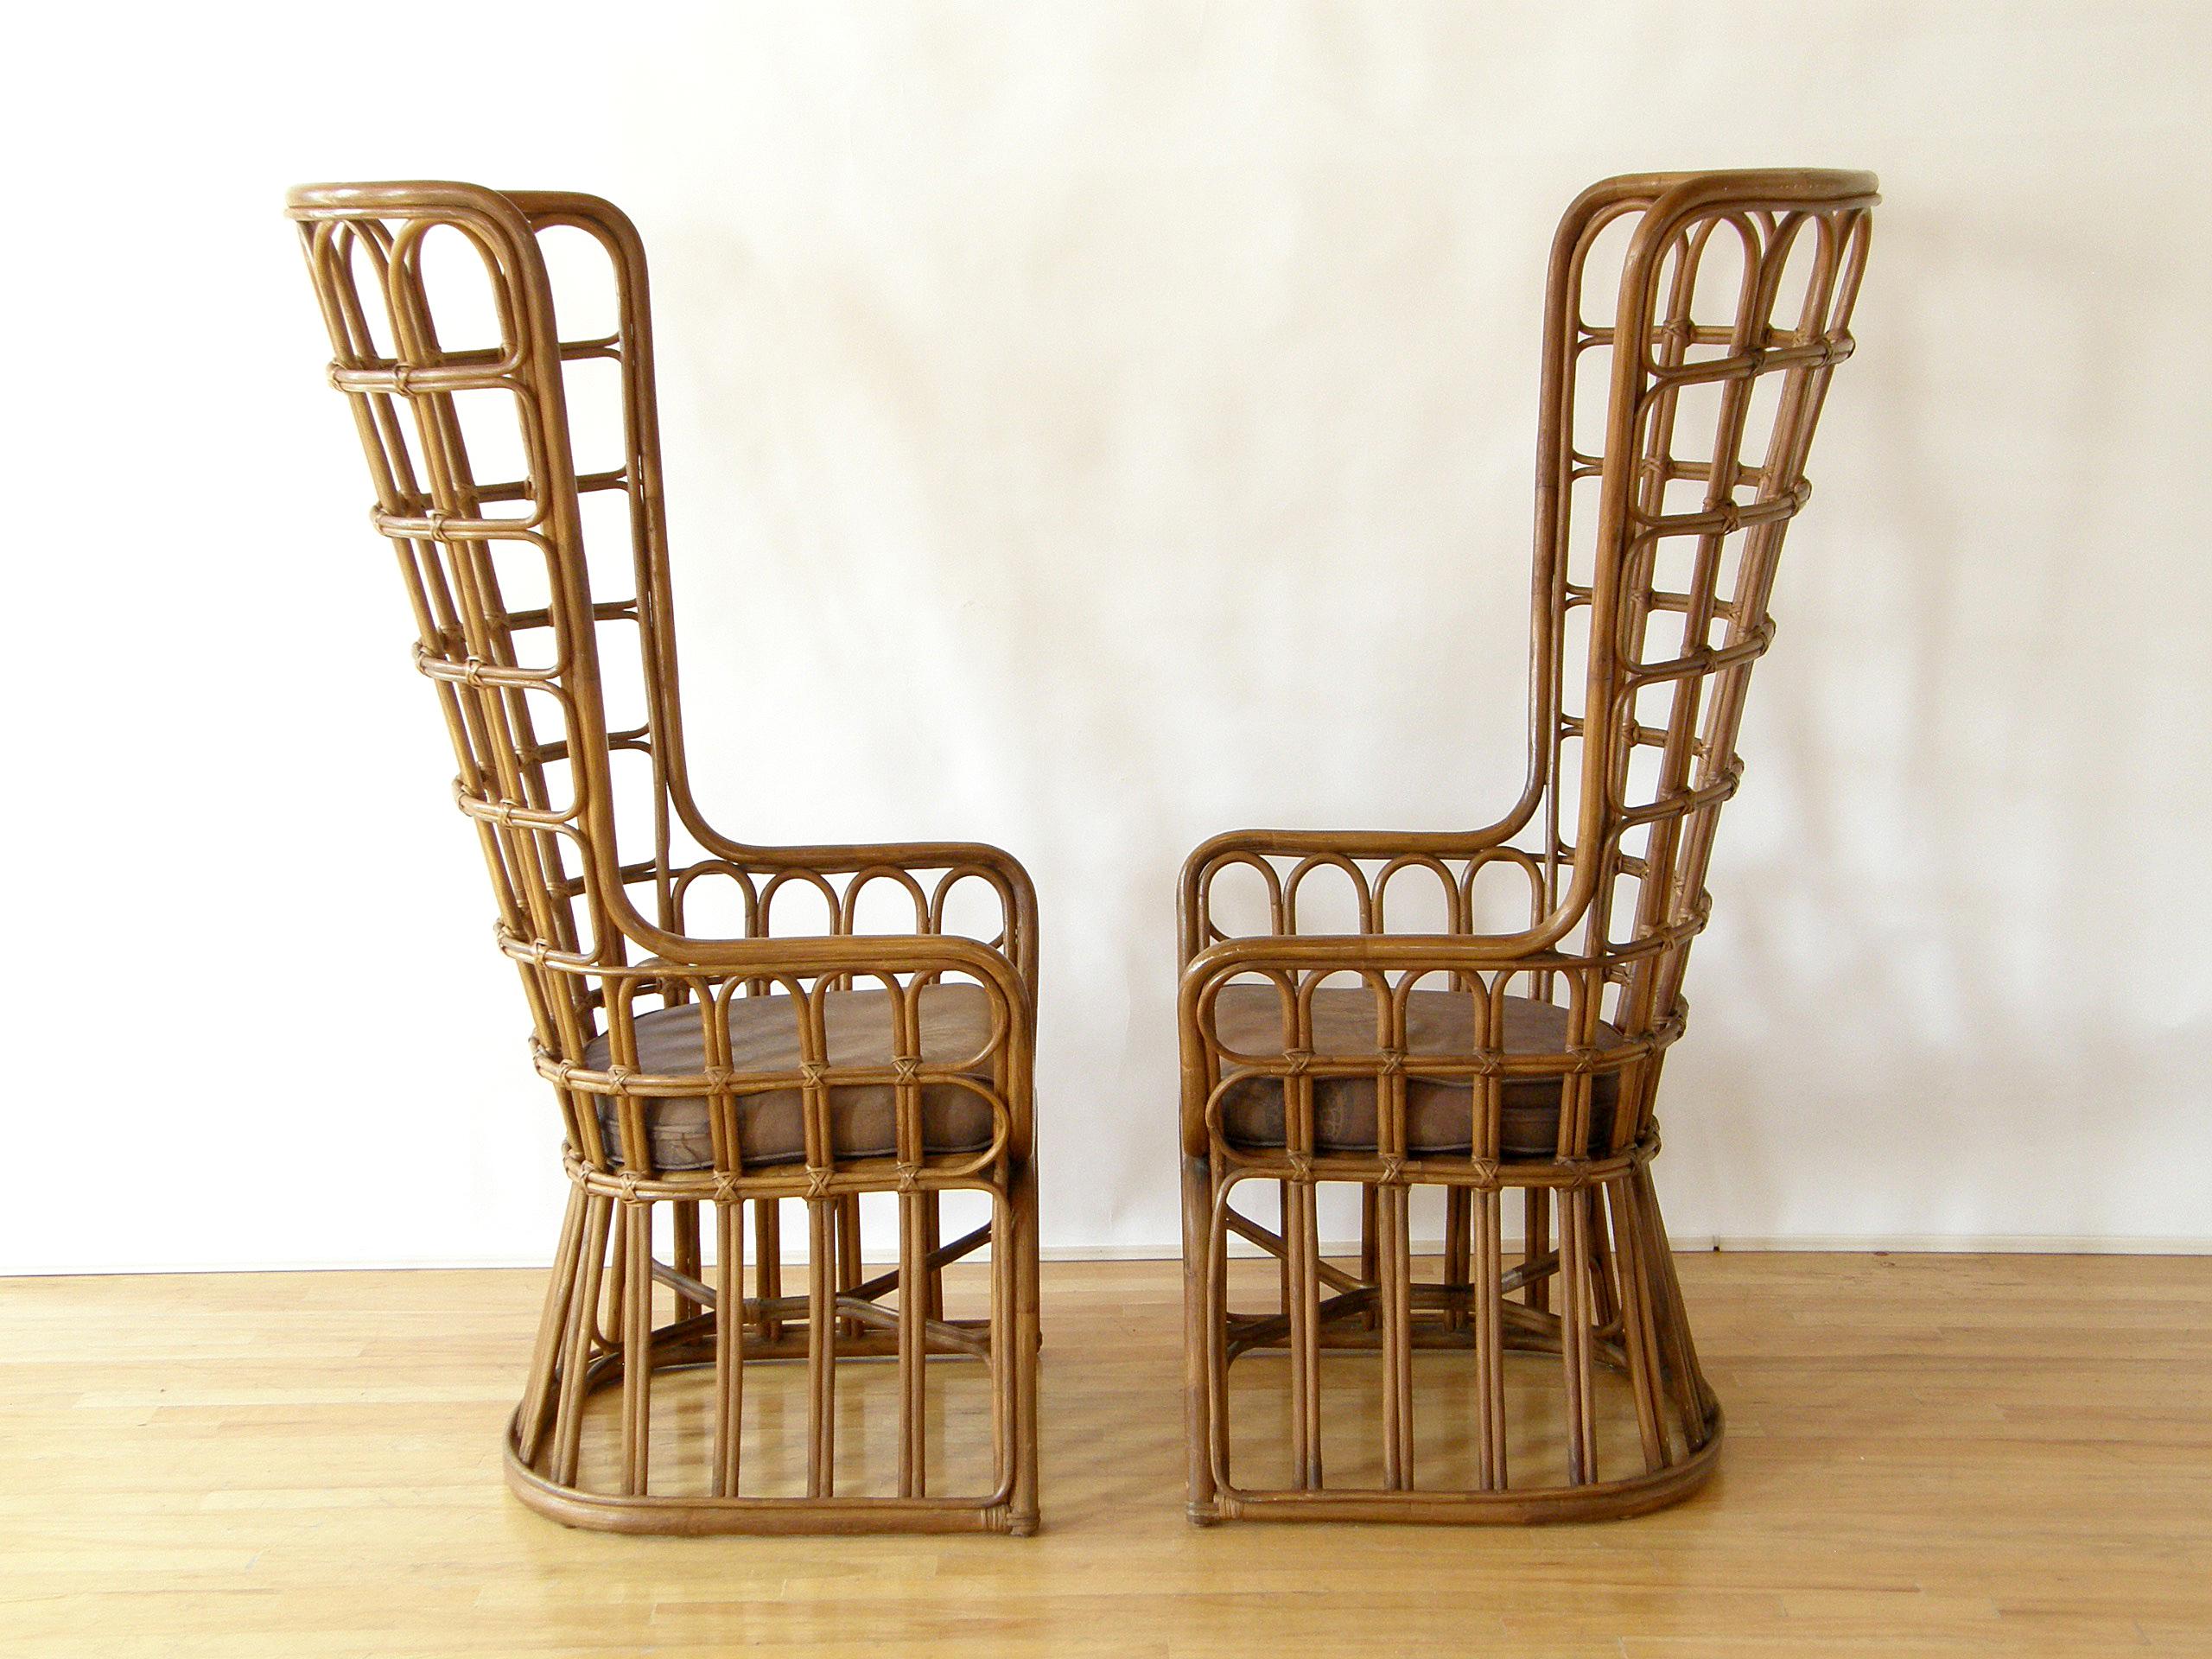 This pair of high back, rattan armchairs has a dramatic presence and a throne-like quality. The chairs are a more modern take on the traditional peacock chair. They have loose cushions and a simplified, fan-shaped back that curves around the sides